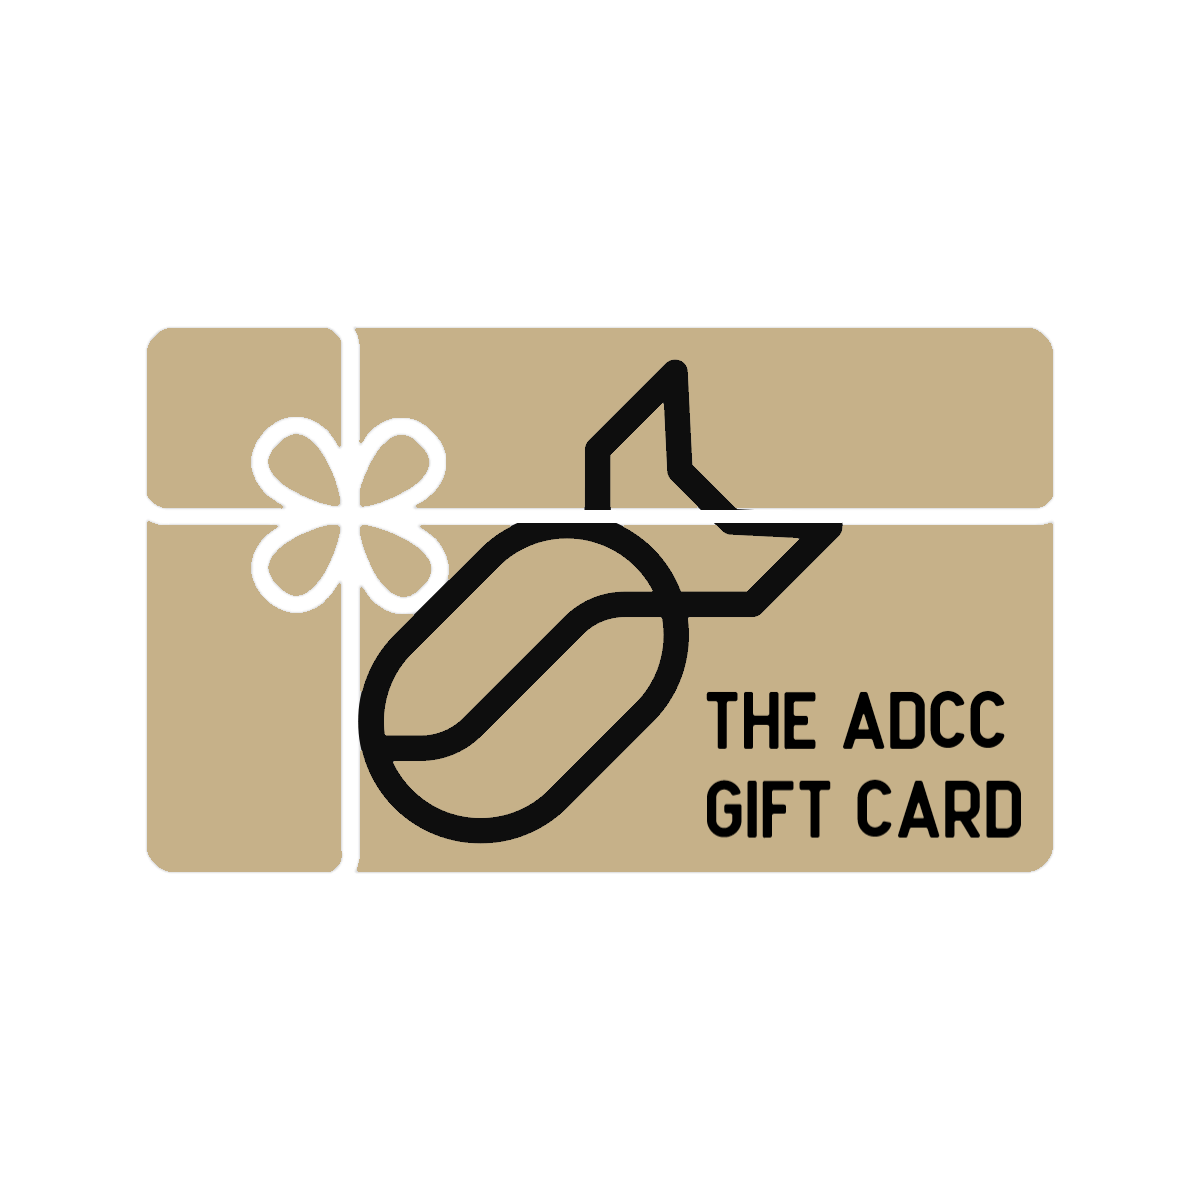 THE ADCC GIFT CARD